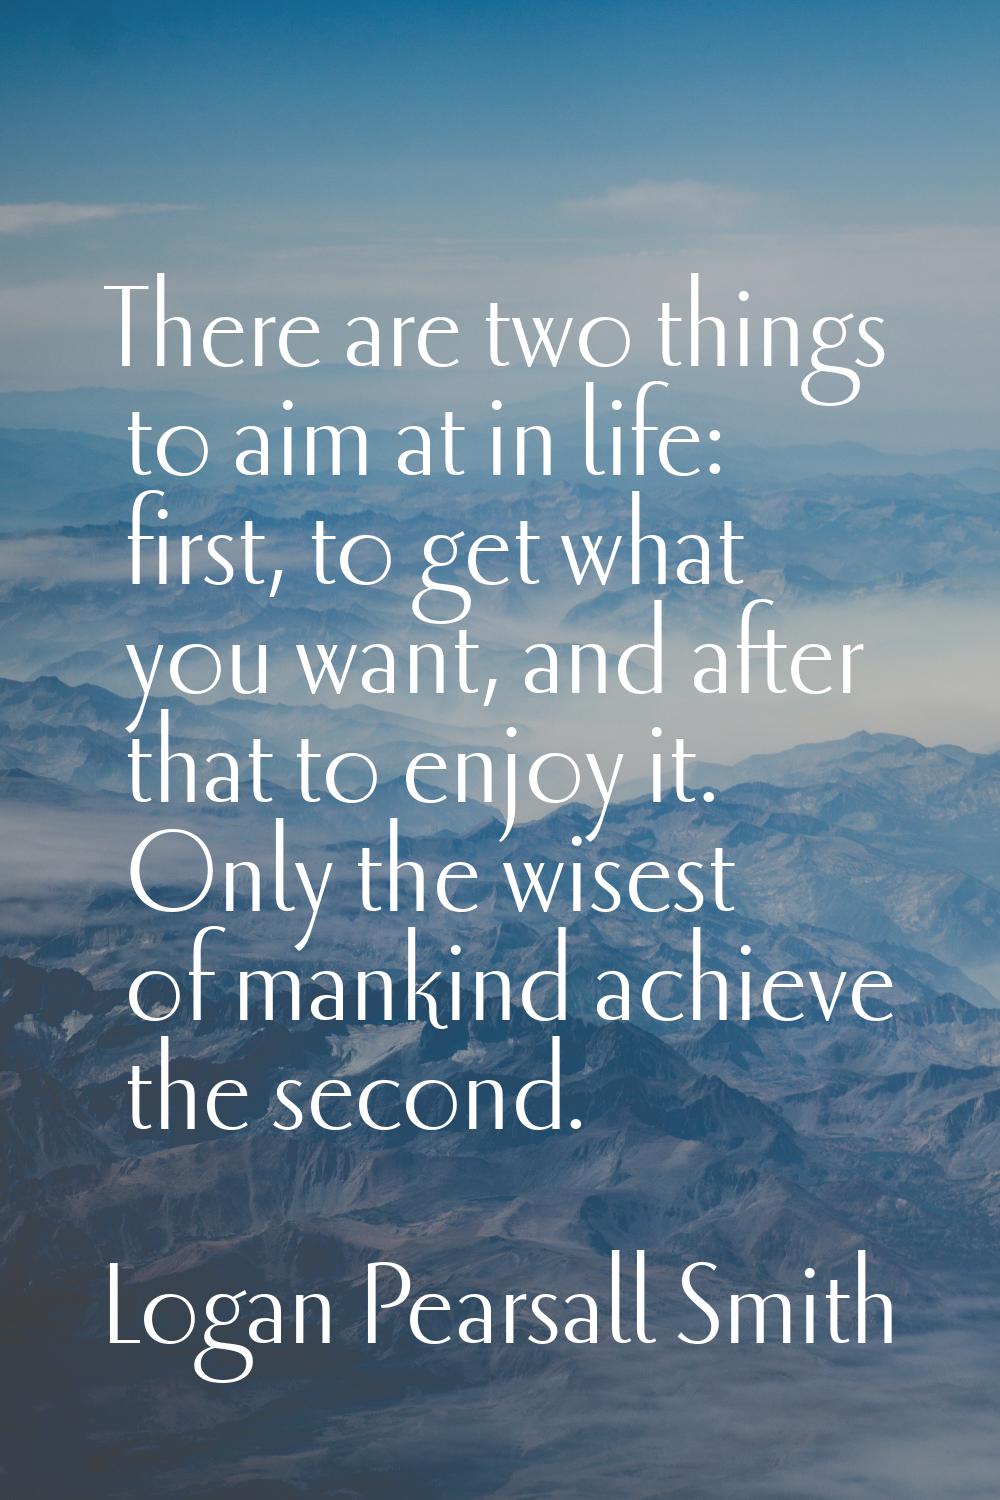 There are two things to aim at in life: first, to get what you want, and after that to enjoy it. On